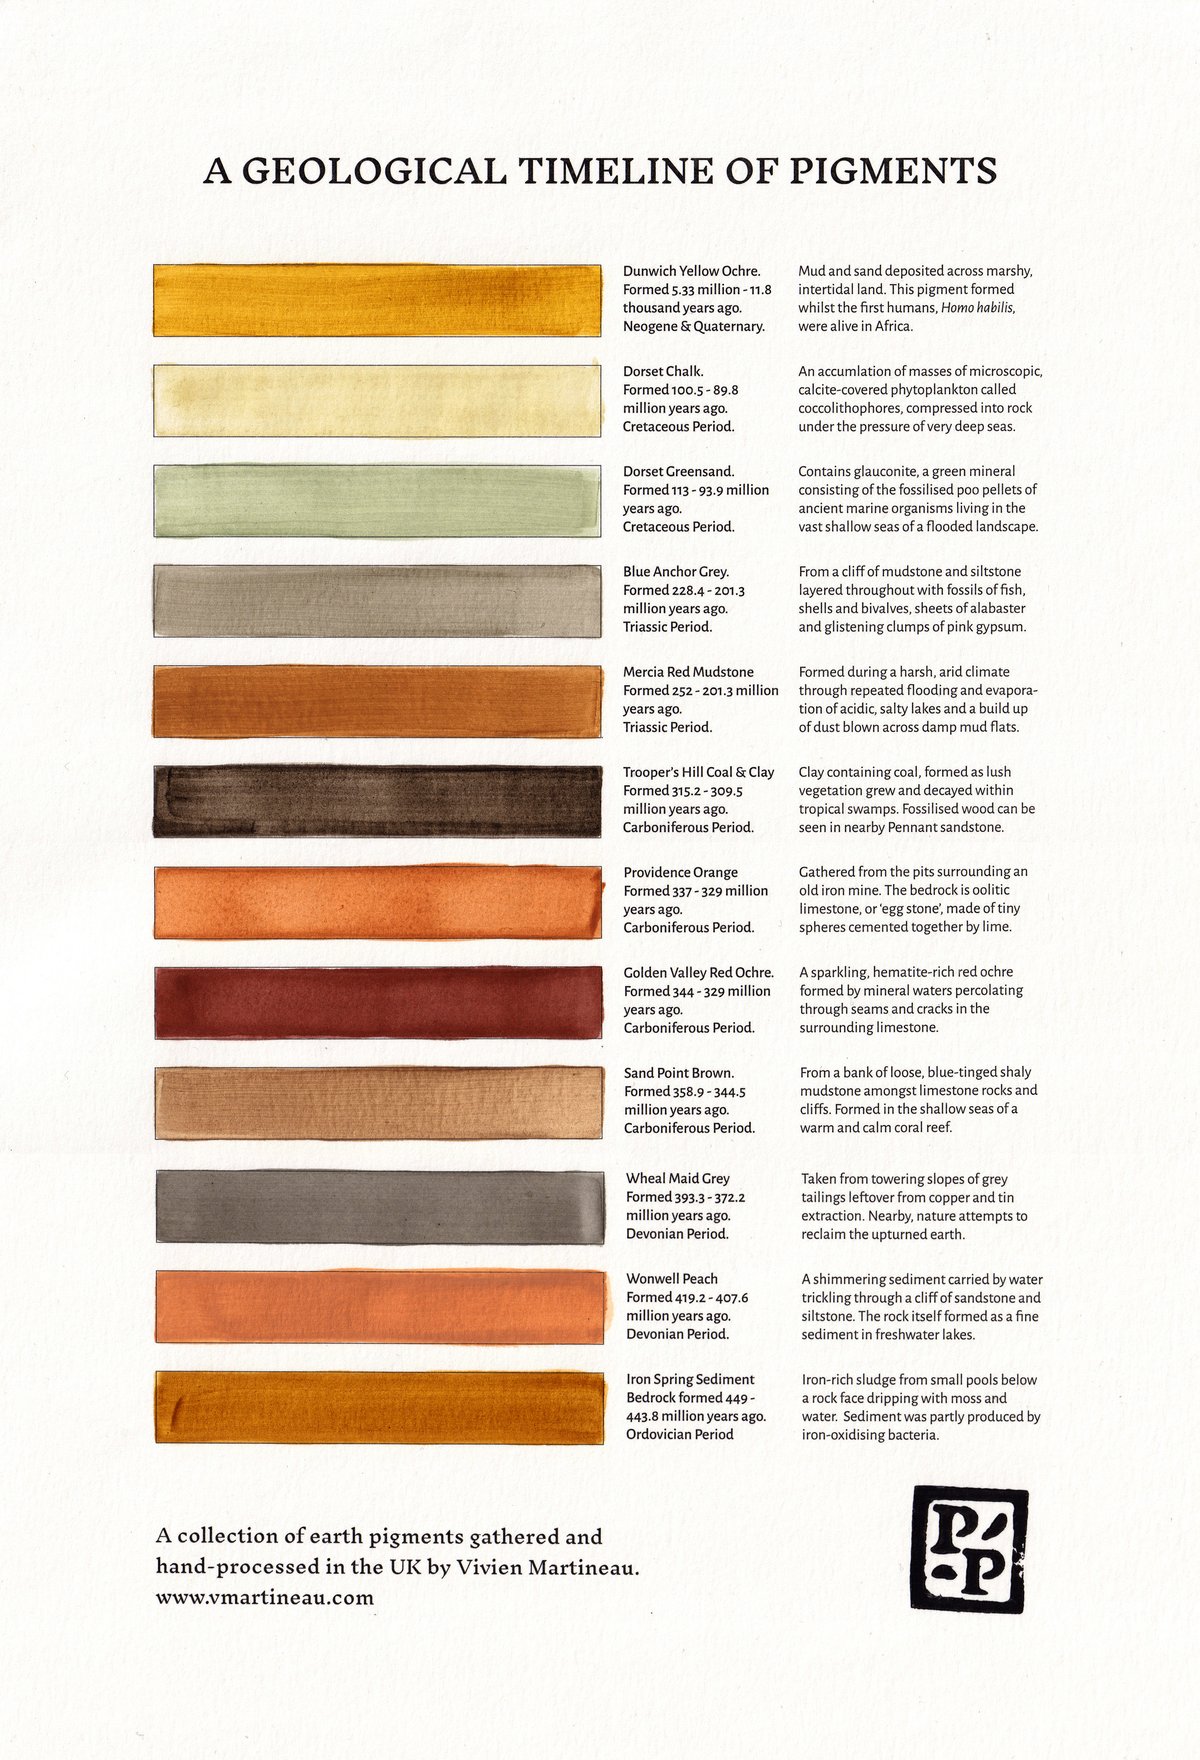 Image of A Geological Timeline of Pigments